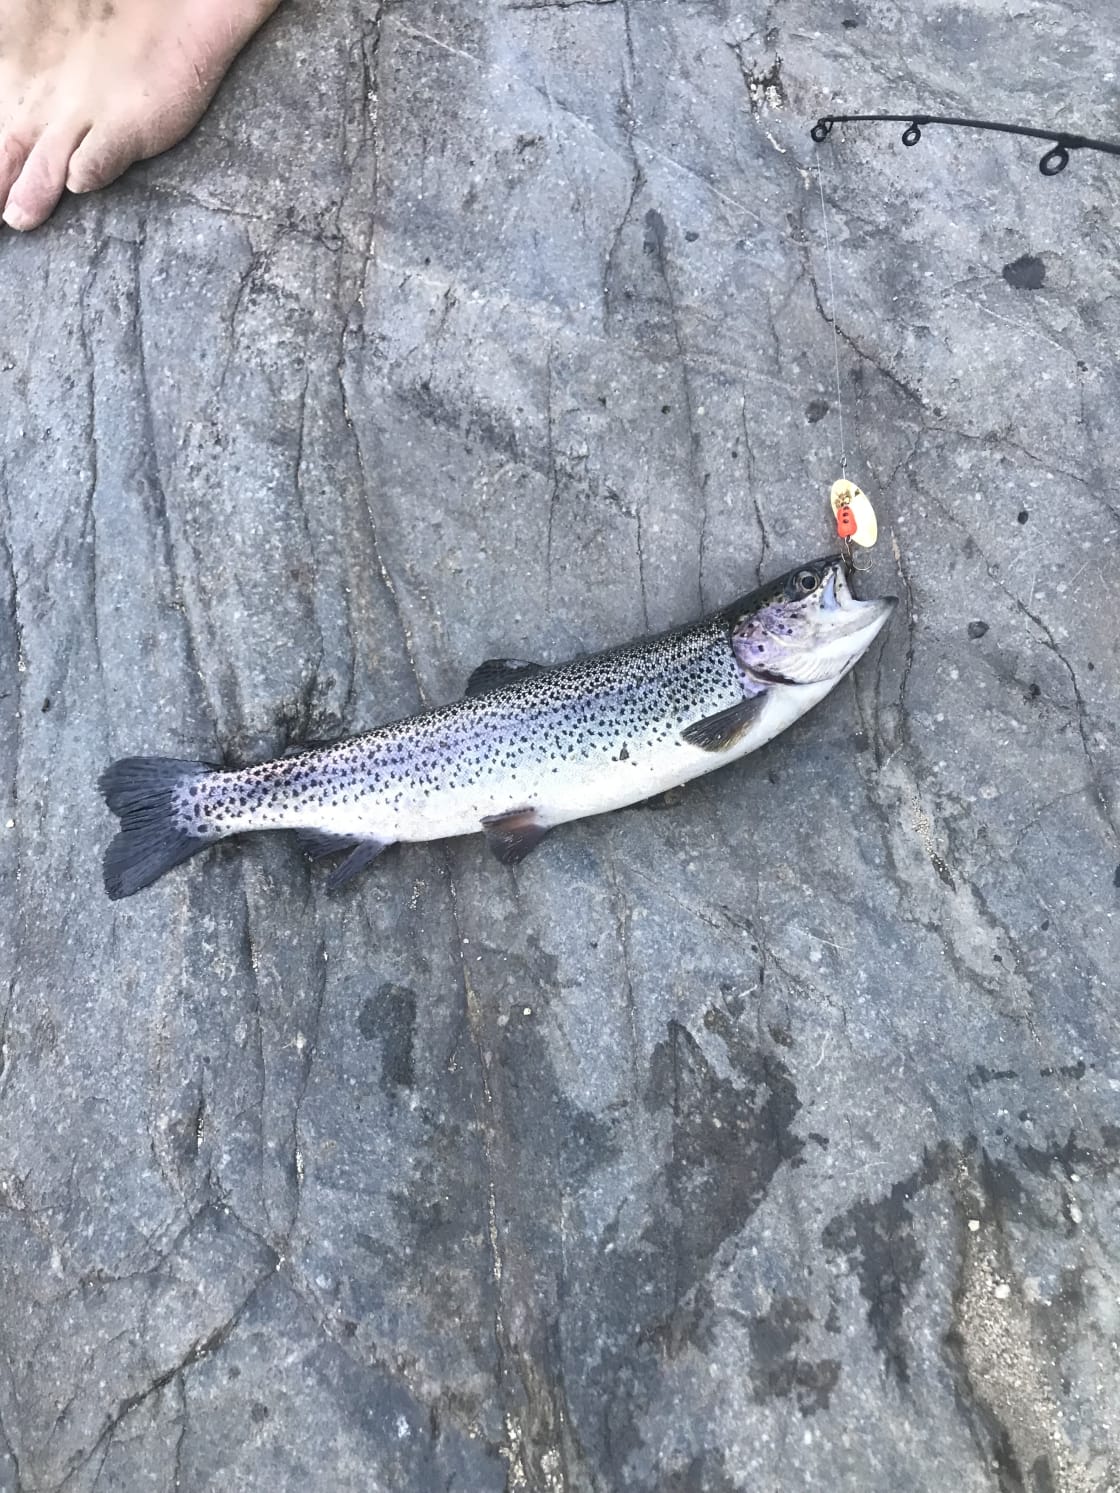 lil rainbow trout from Kern River